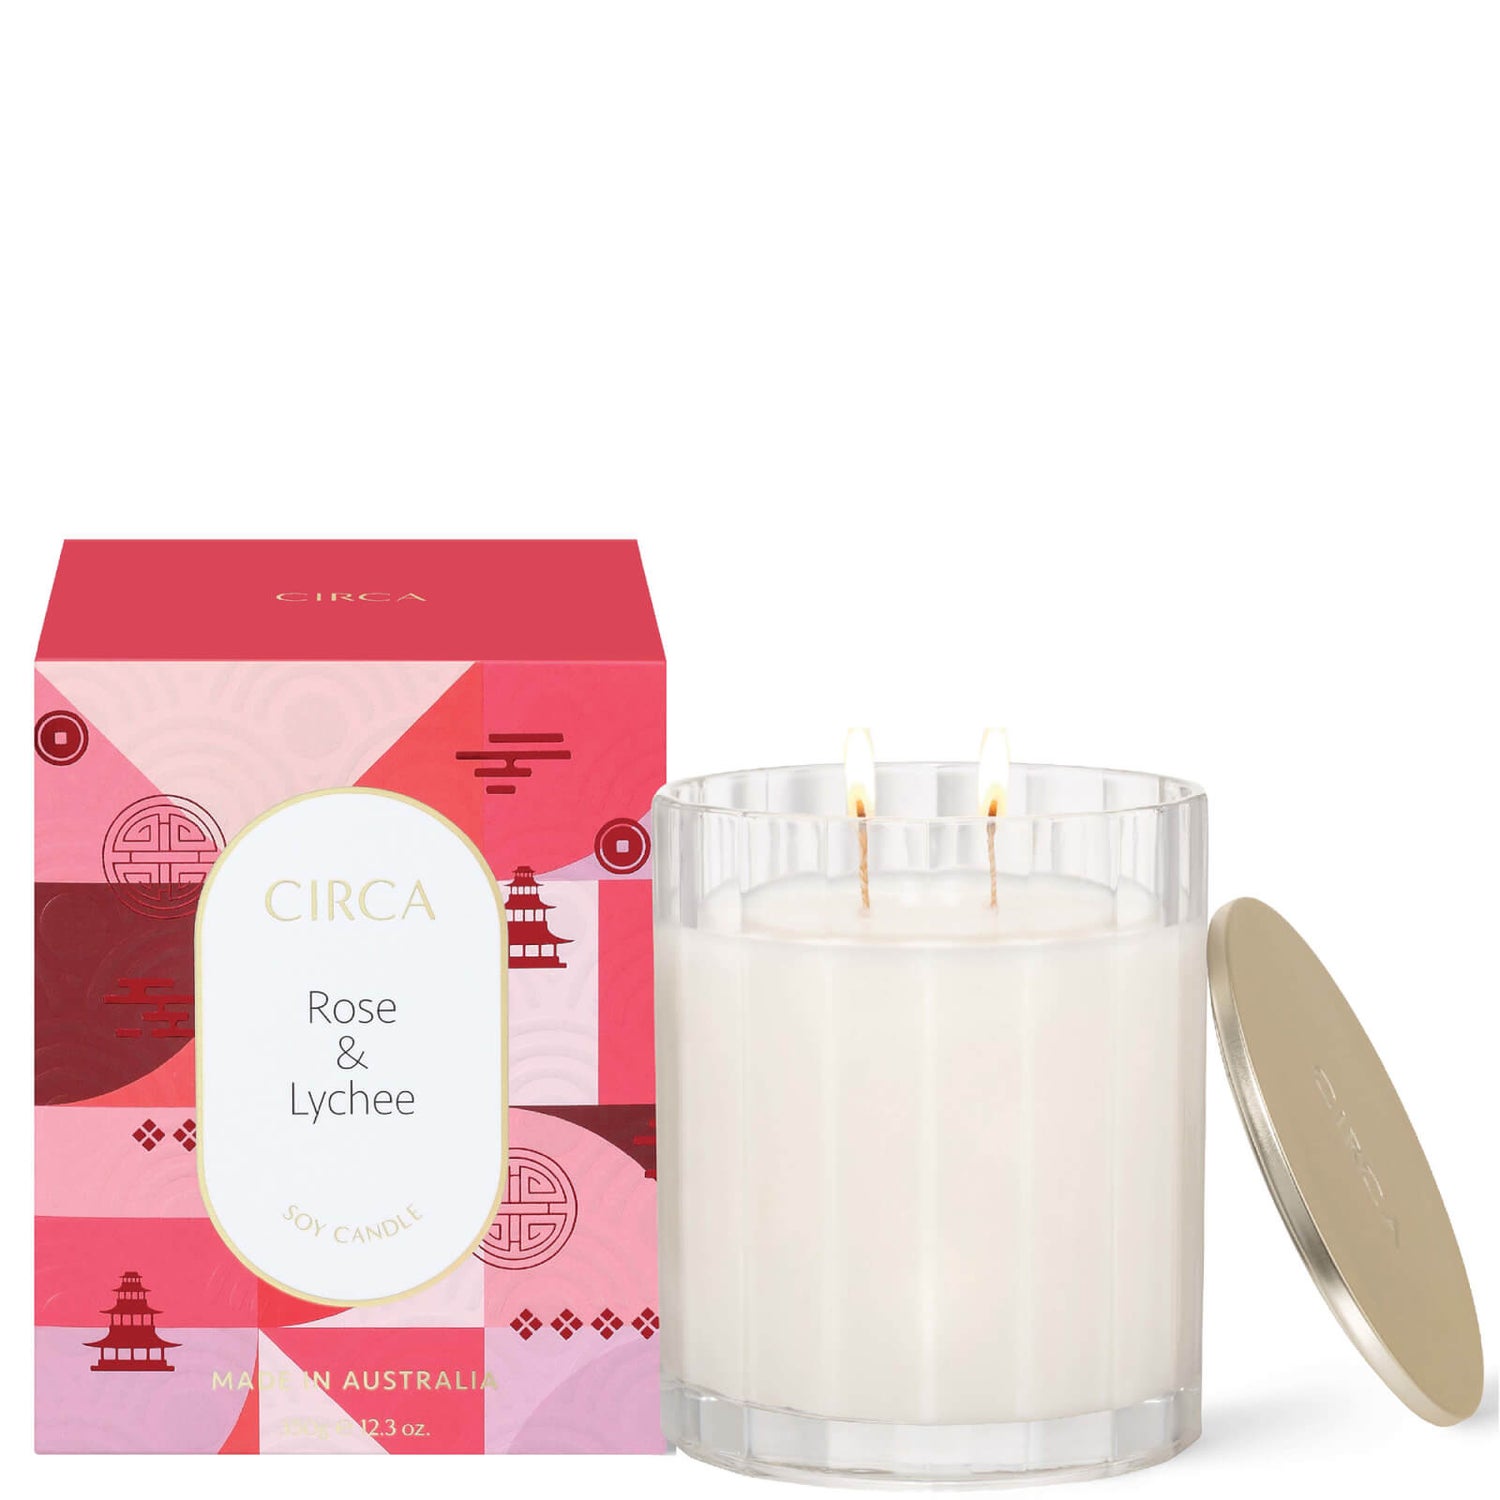 CIRCA Rose and Lychee Lunar New Year Candle 350g